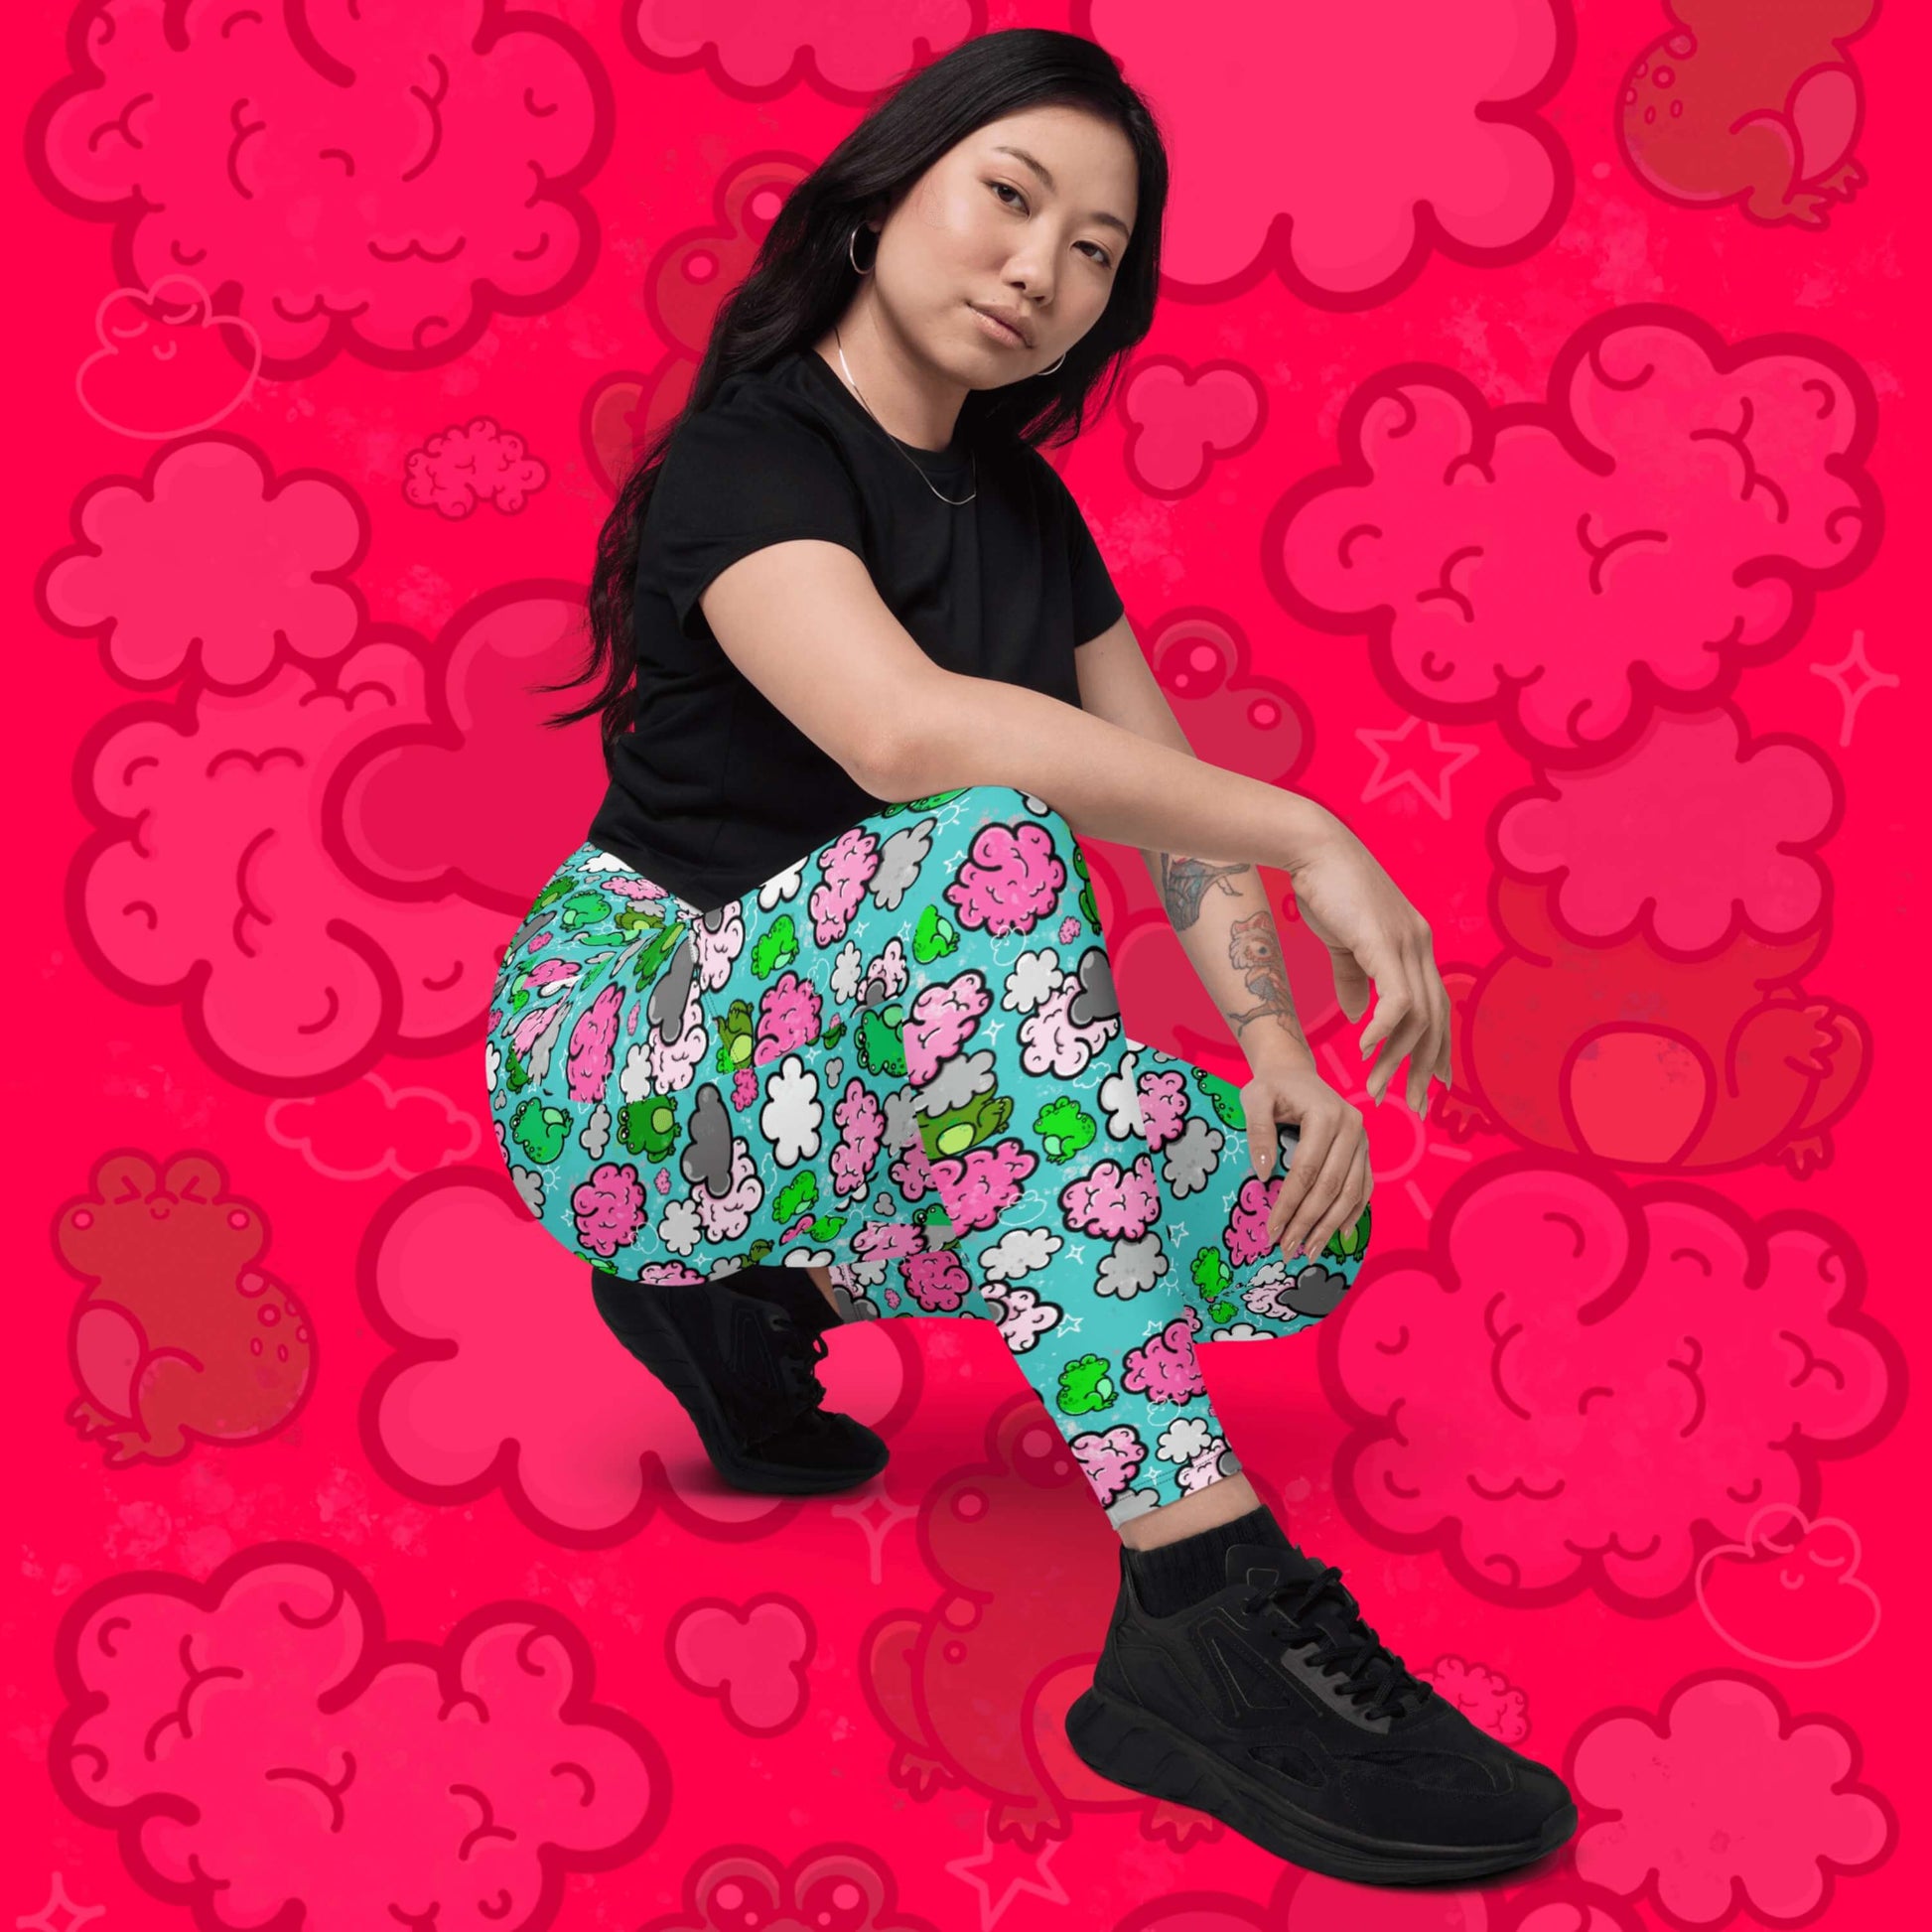 The Brain Frog Leggings with pockets - Brain Fog being worn by a model facing forward crouched down with their arms resting on their legs whilst smising to camera on a red background with a faded brain frog print. The leggings are an aqua blue base with various green kawaii face frogs with pink blush cheeks, pink brain style clouds, white and grey clouds and white sparkles all over. The design was created to raise awareness of Brain Fog.